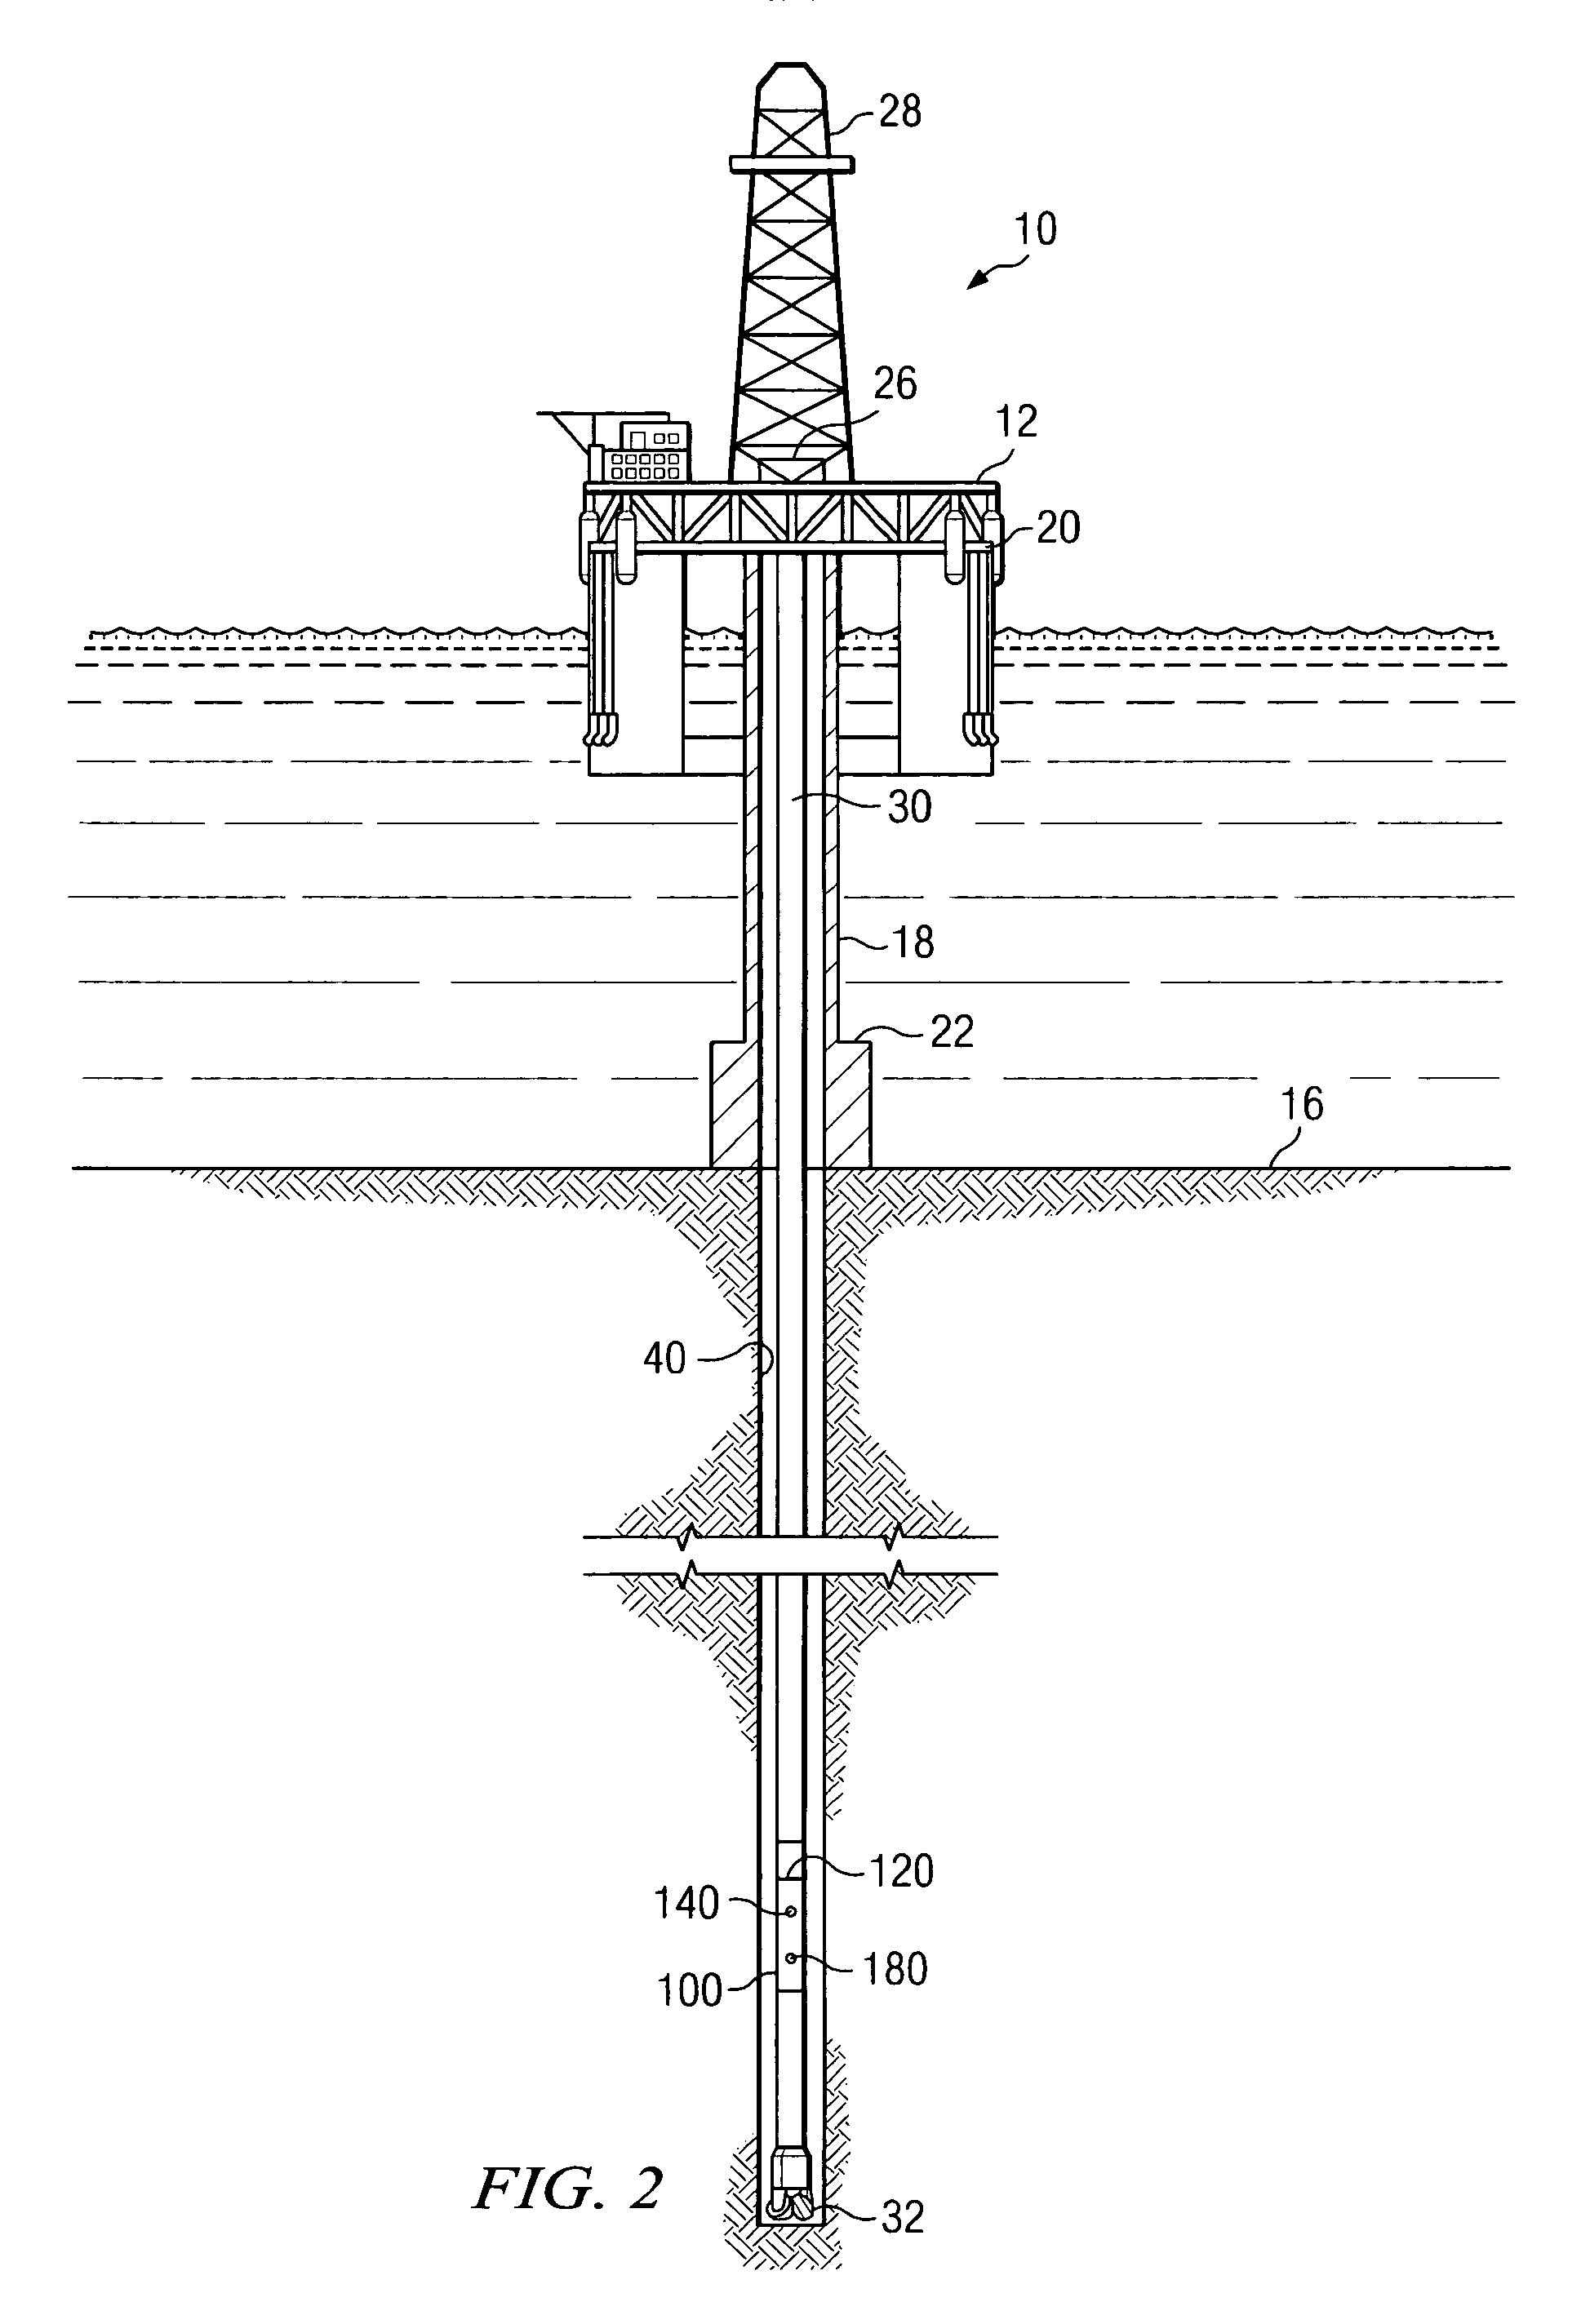 Well logging apparatus for obtaining azimuthally sensitive formation resistivity measurements